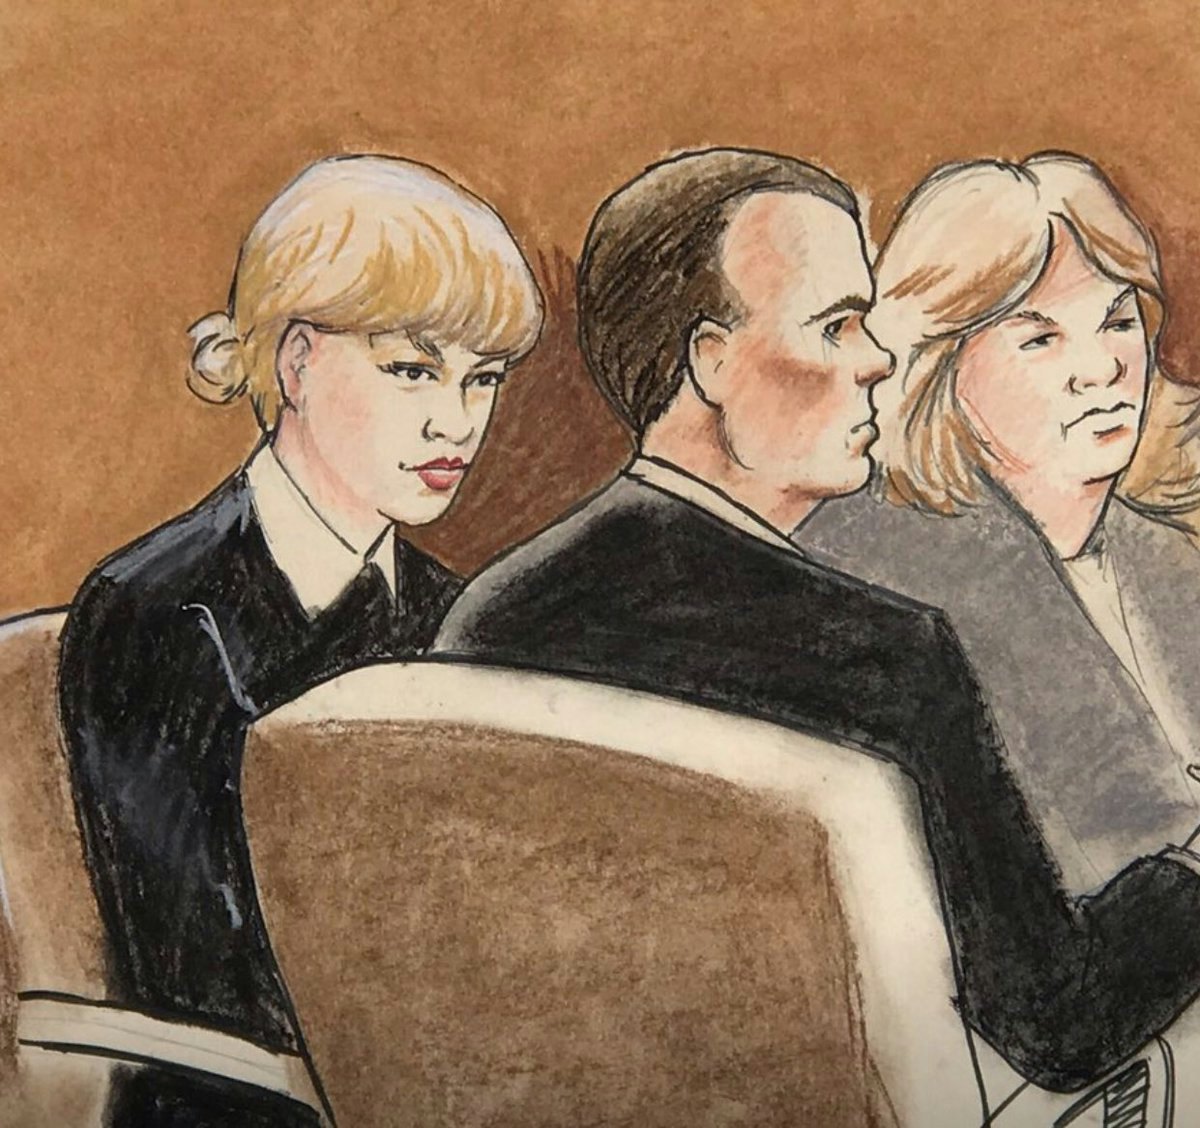 The Courtroom Sketch A Piece of History and Art  The New York Times